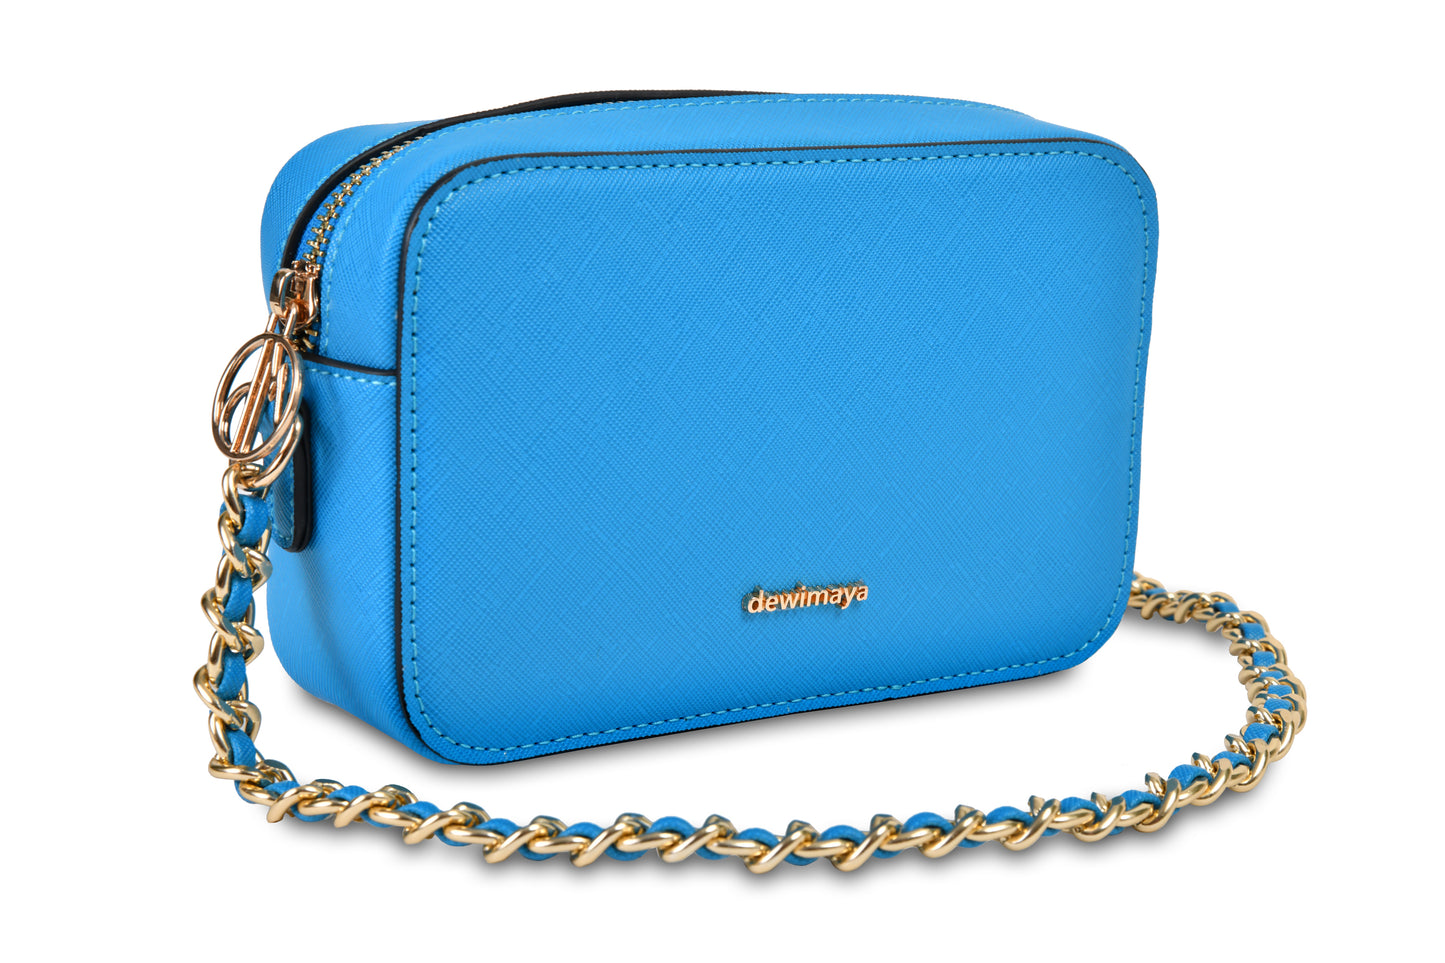 Chloe Blue Handbag made by Dewi Maya front view with gold shoulder strap chain available at the best boutique in Upstate South Carolina Spartanburg Greenville Dewi Maya Boutique